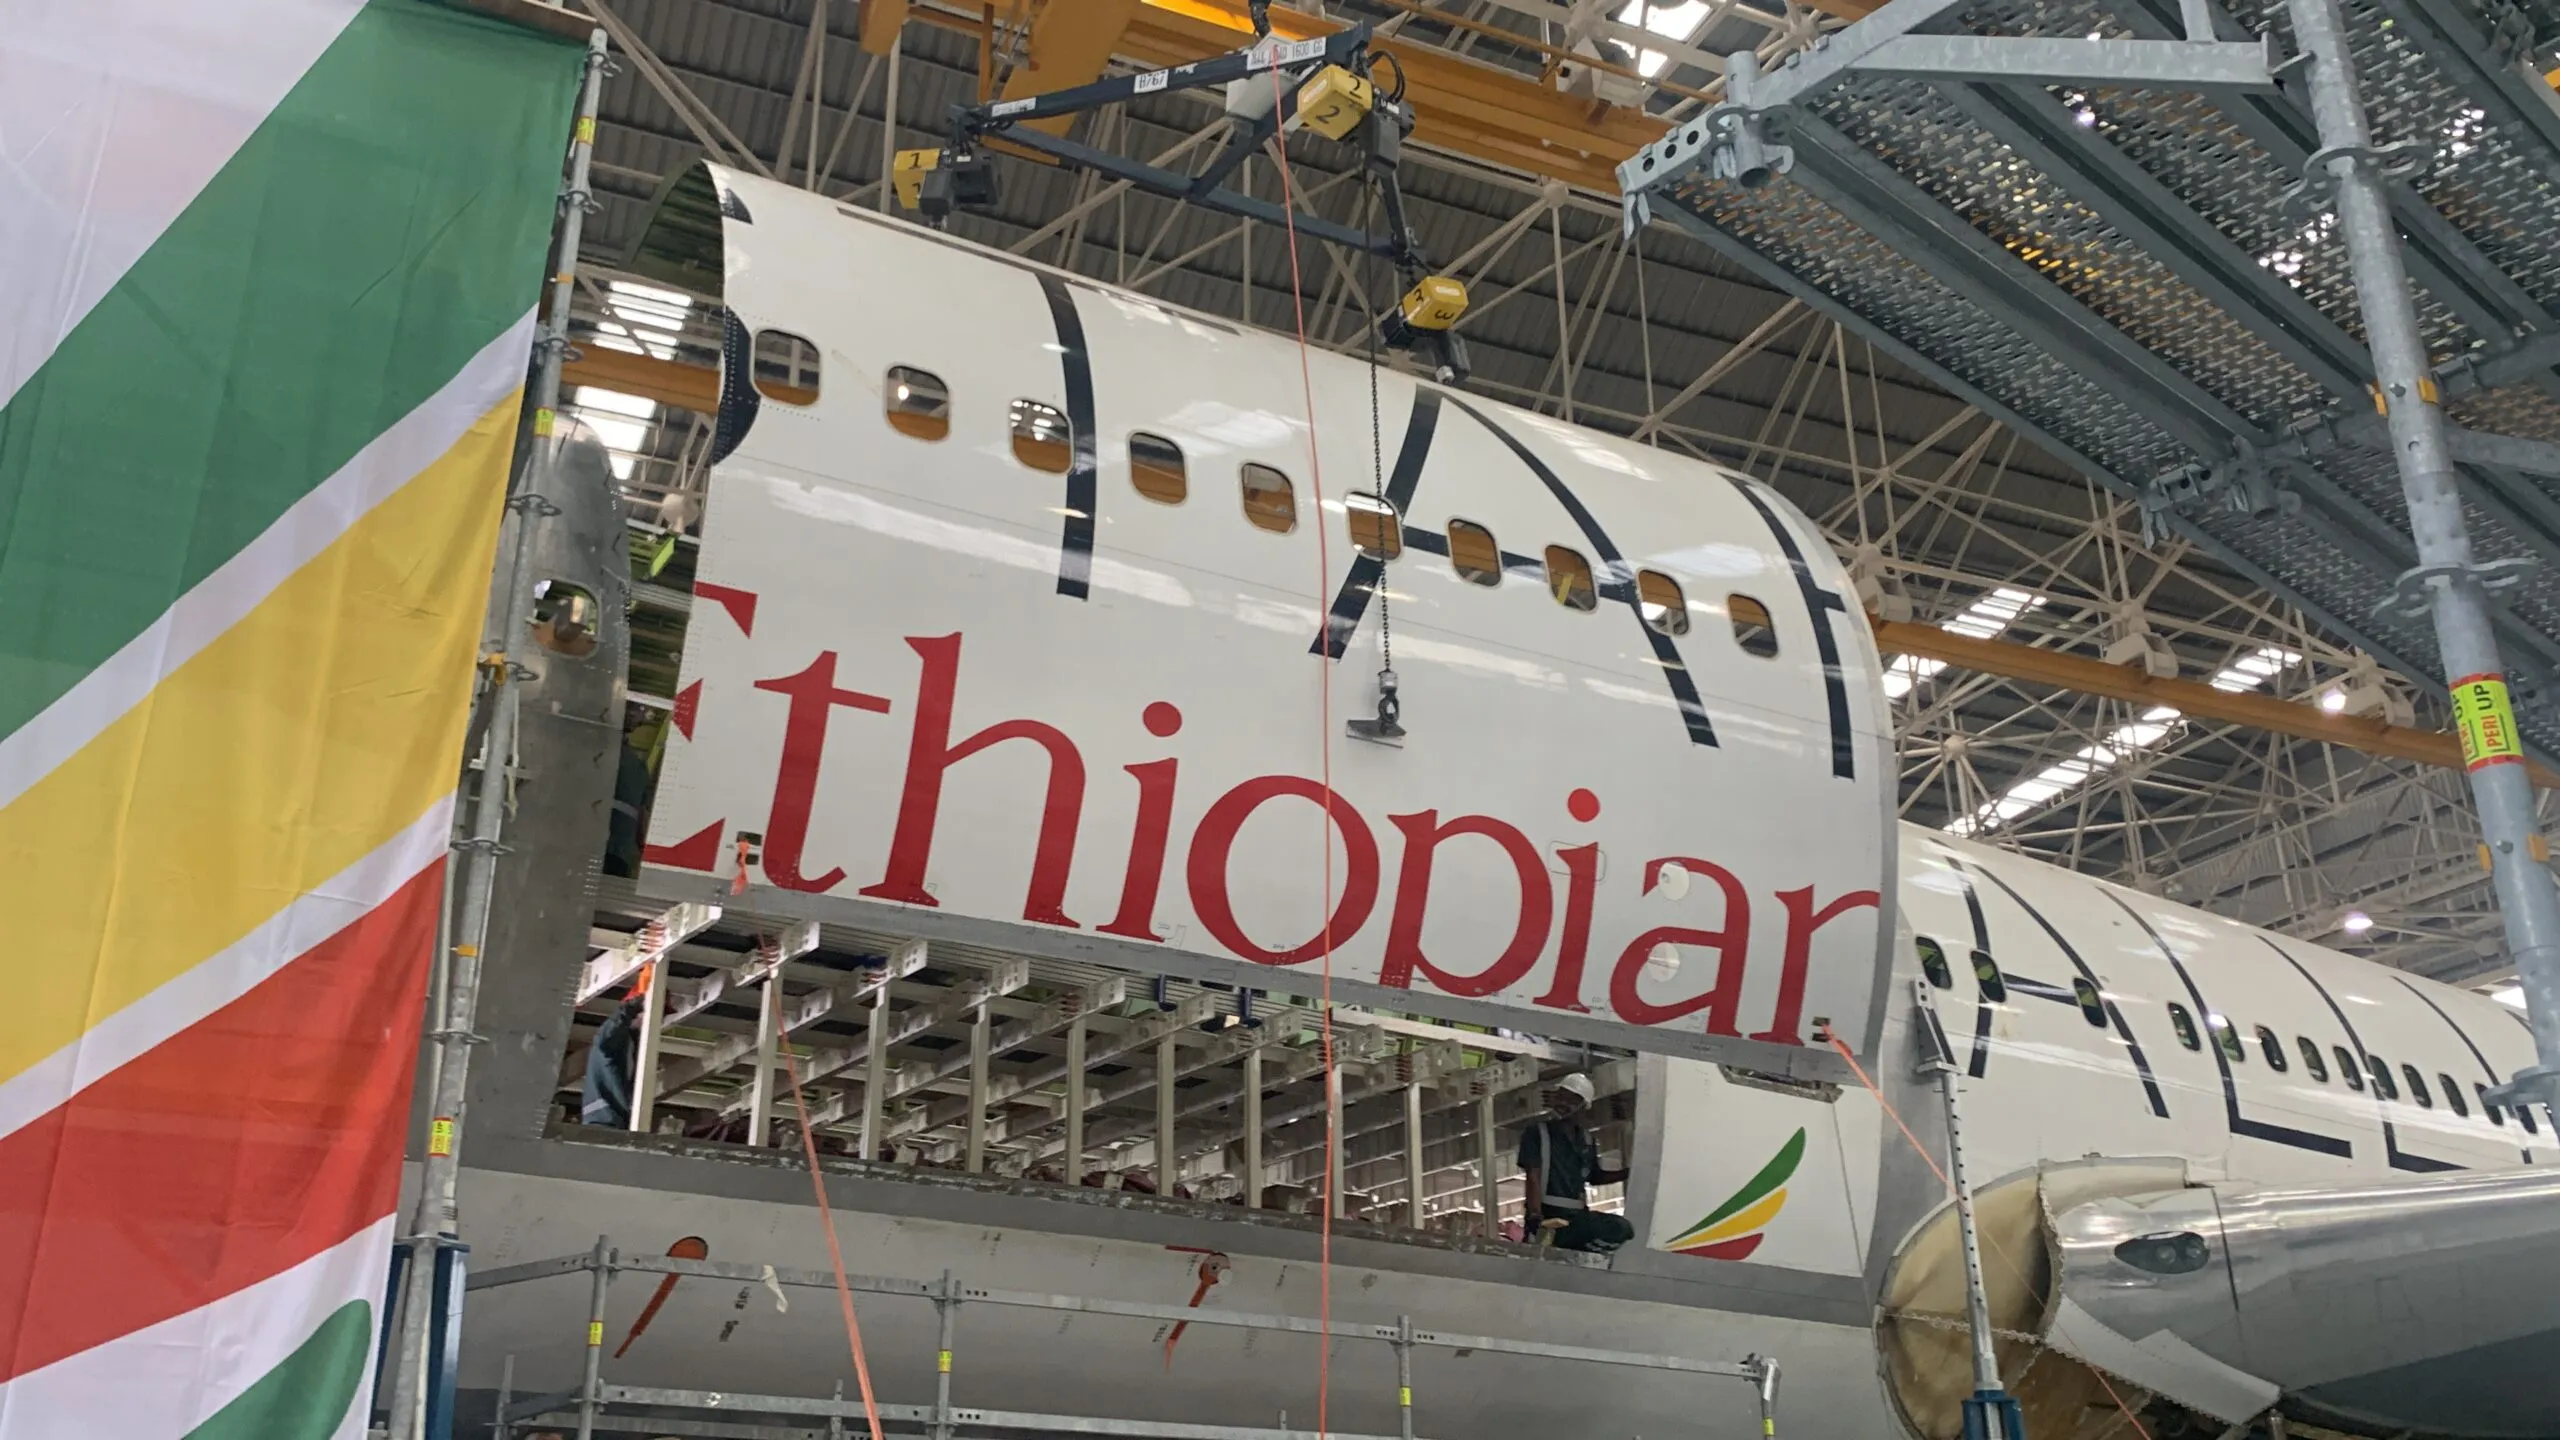 Ethiopian Airlines Completes First Boeing 767 Freighter Conversion in Africa